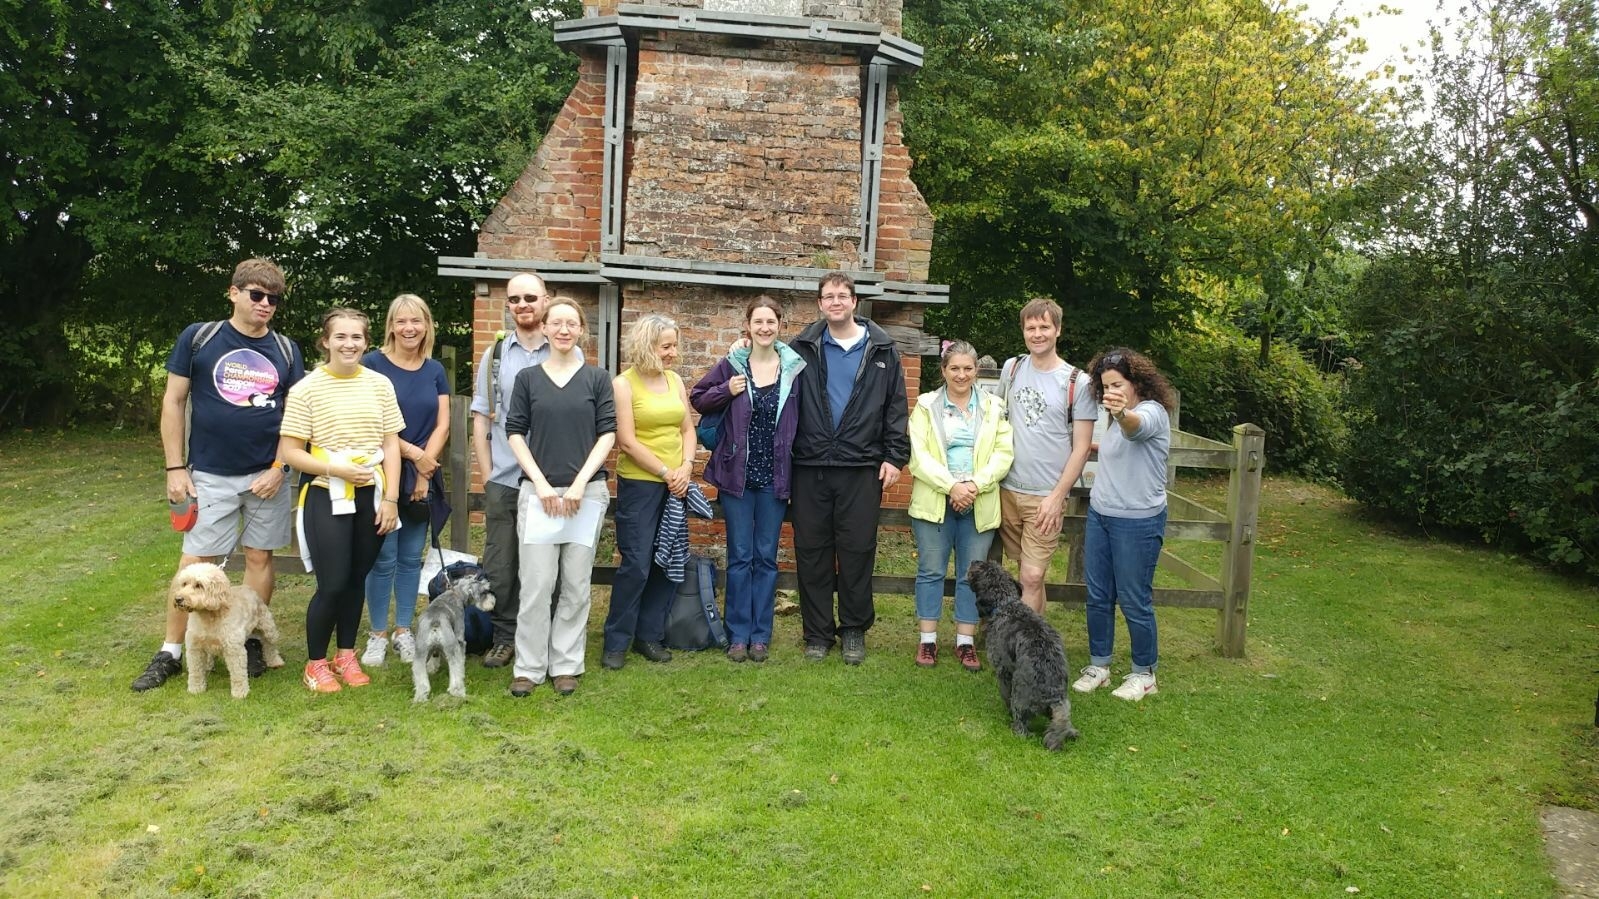 St Albans intellectual property specialists raise funds for charity with weekend ramble